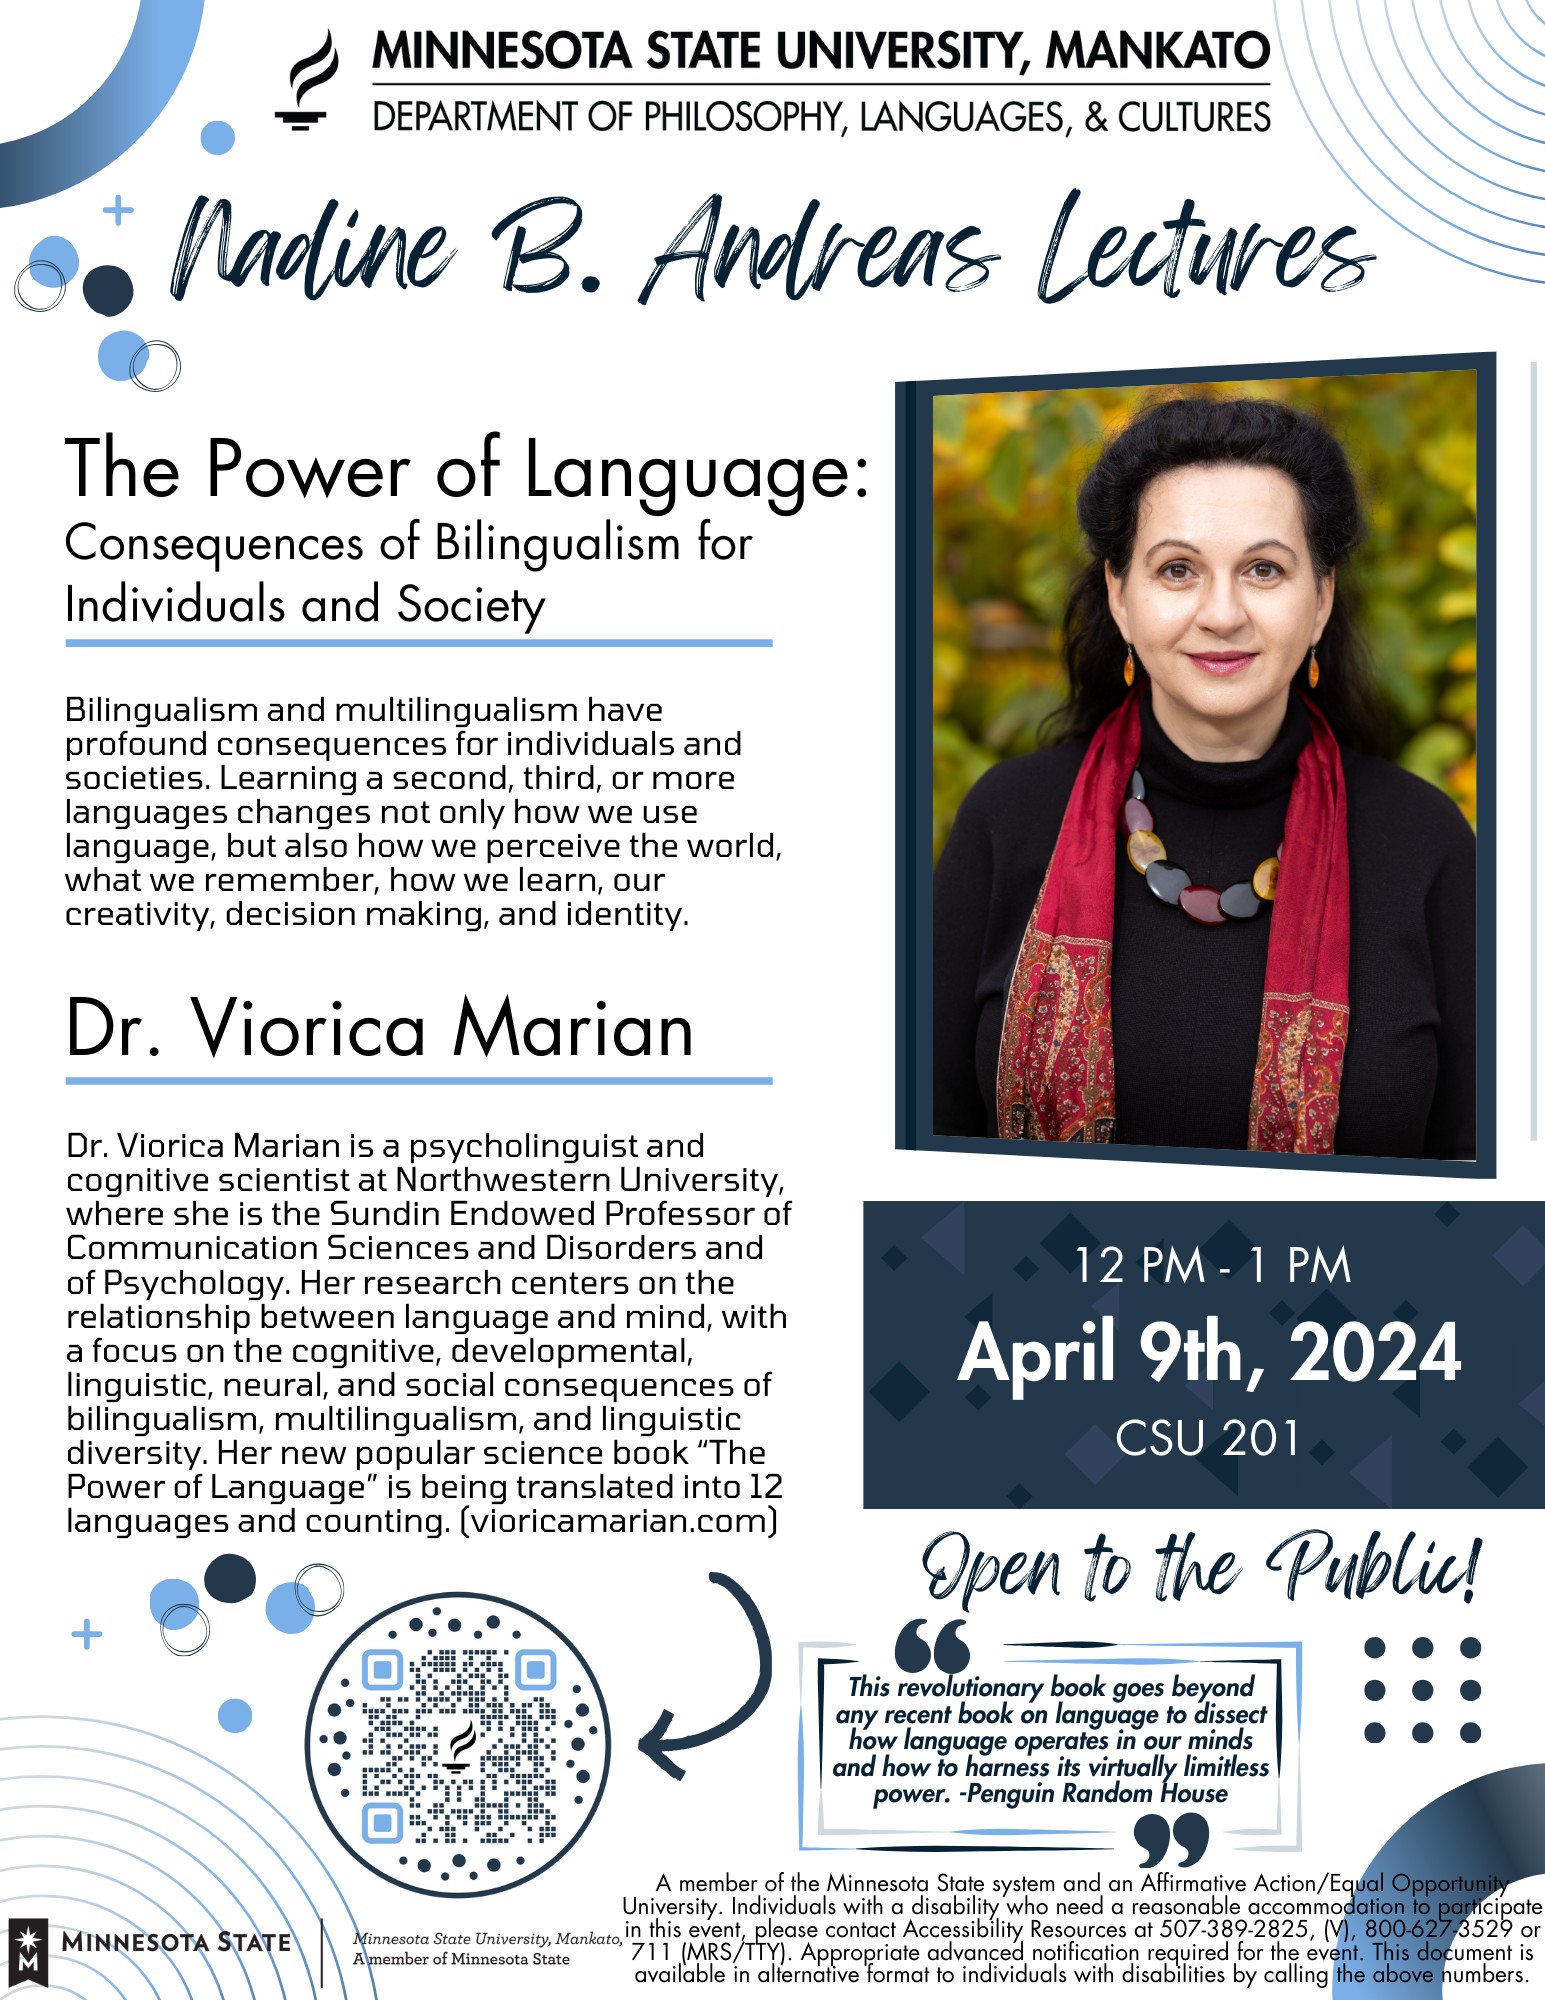 The Power of Language:  Consequences of Bilingualism for  Individuals and Society Flyer